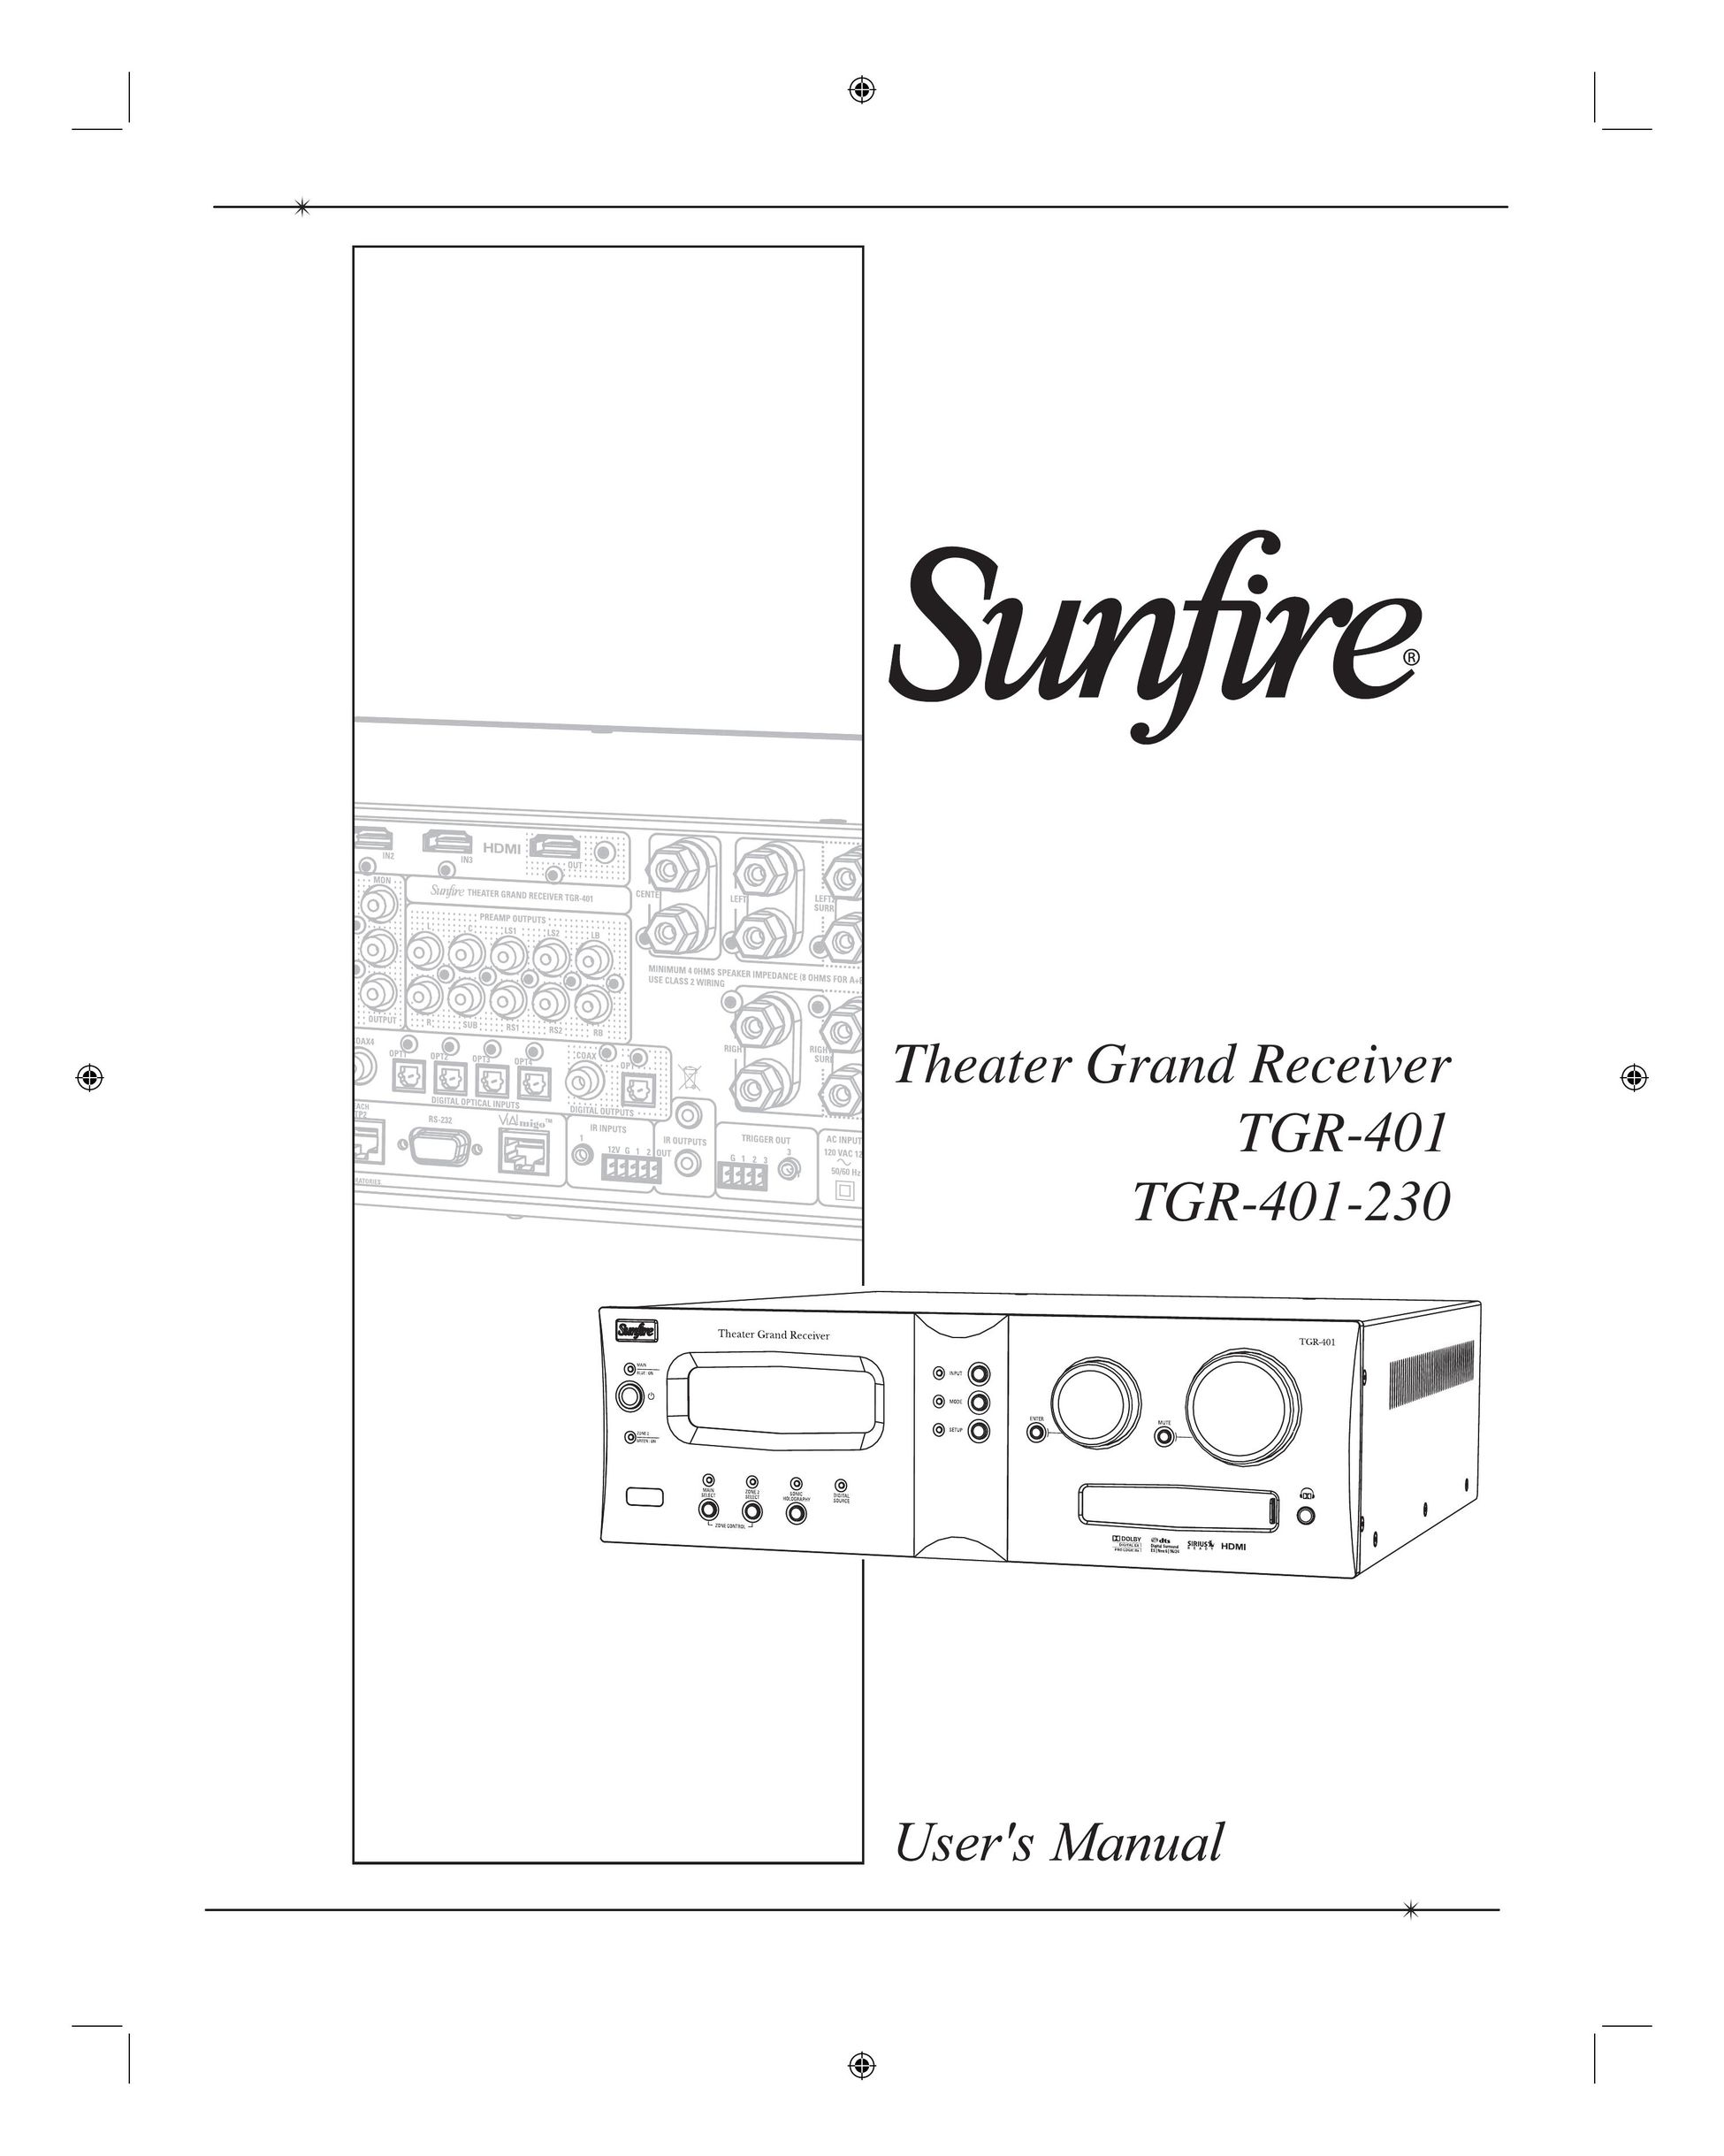 Sunfire TGR-401-230 Home Theater System User Manual